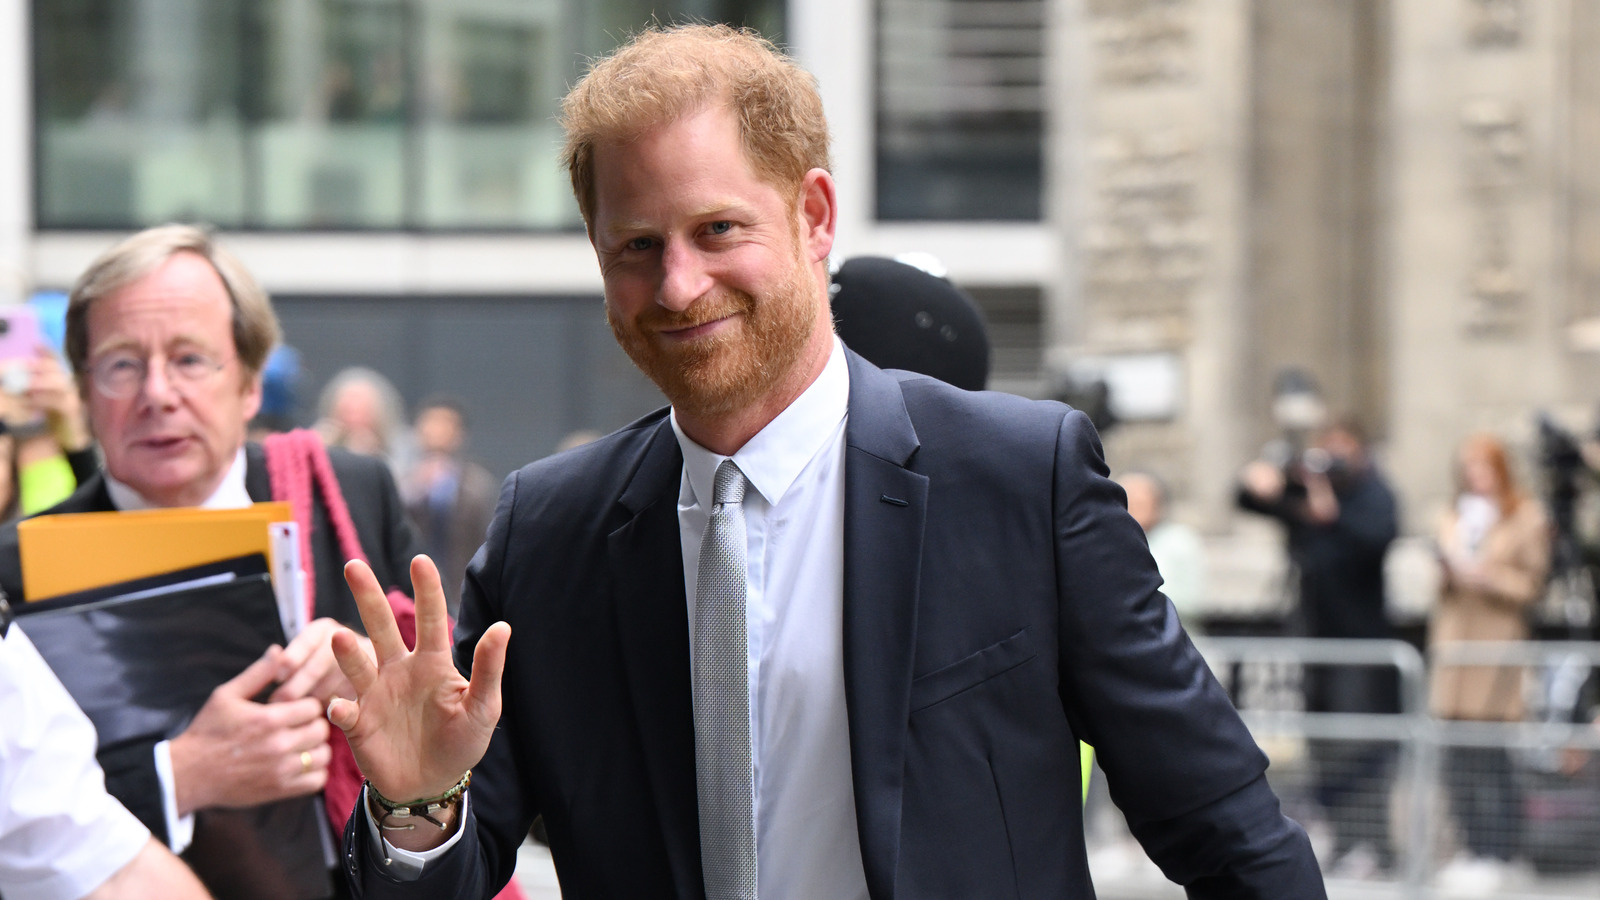 Prince Harry Wins Small Fight Against Group Challenging His US Visa ...